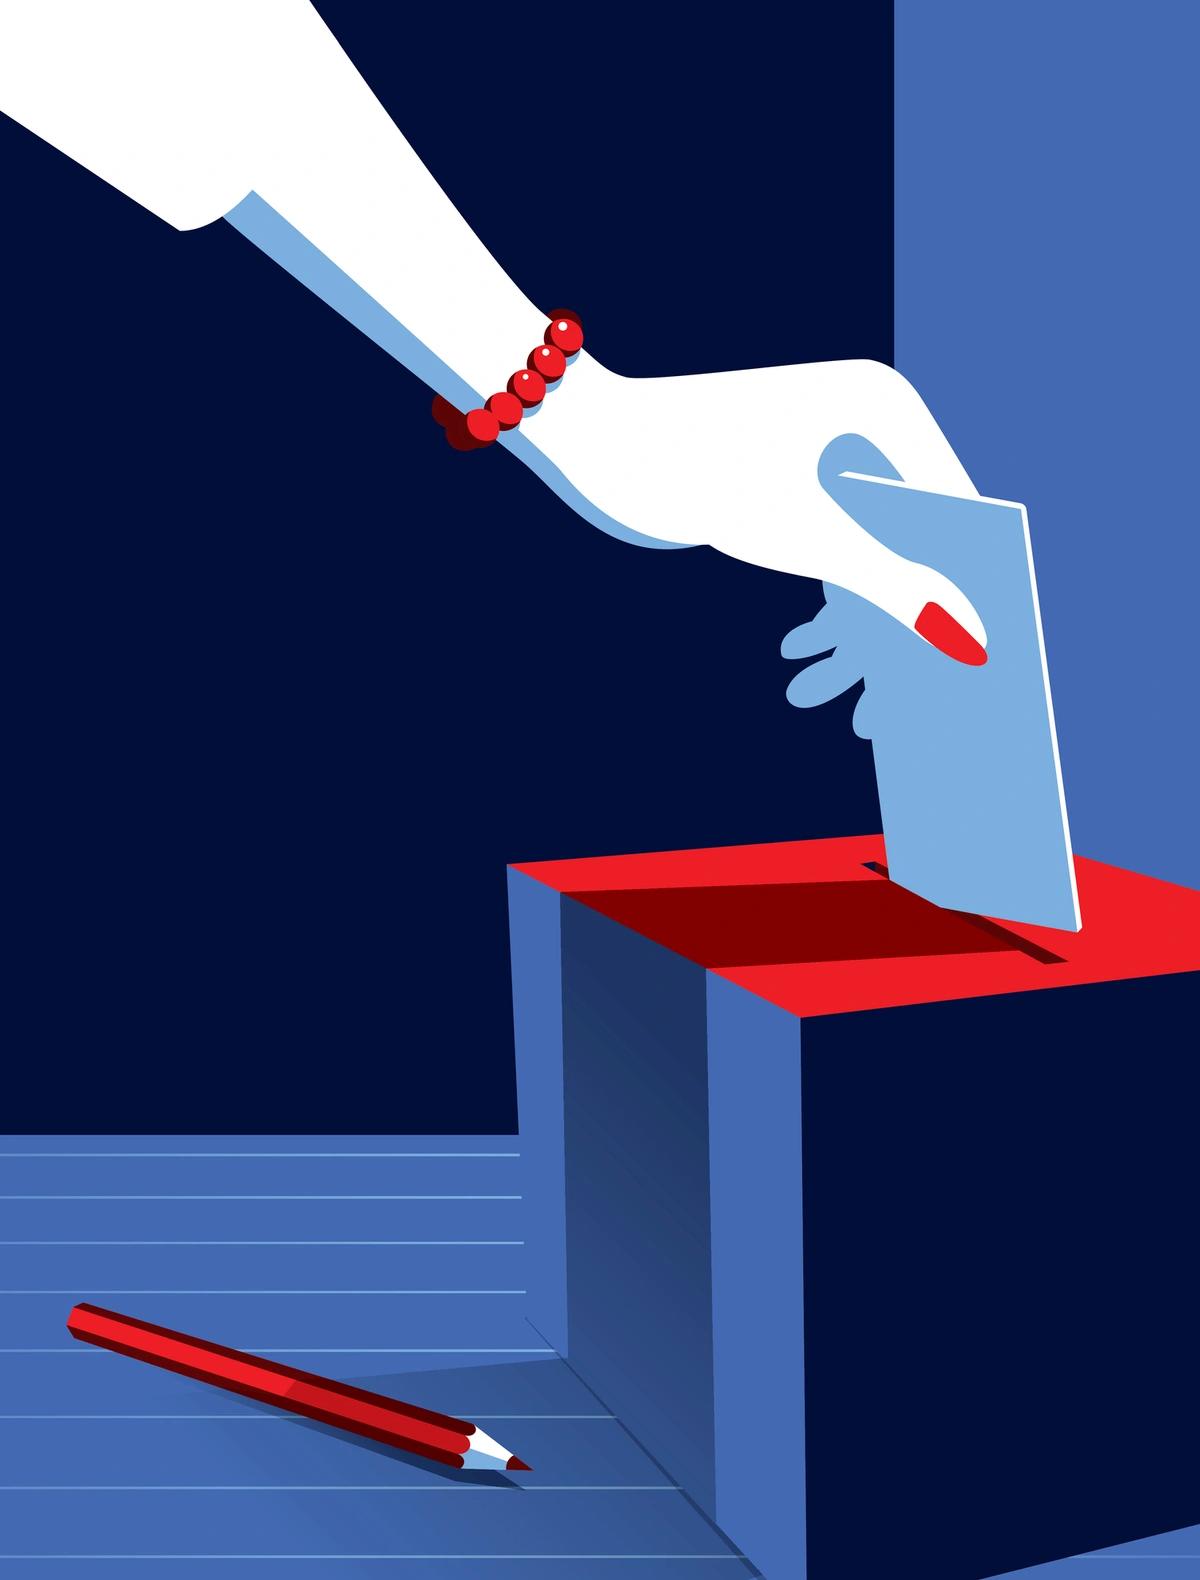 Colourful illustration of person with red nail polish casting vote in ballot box